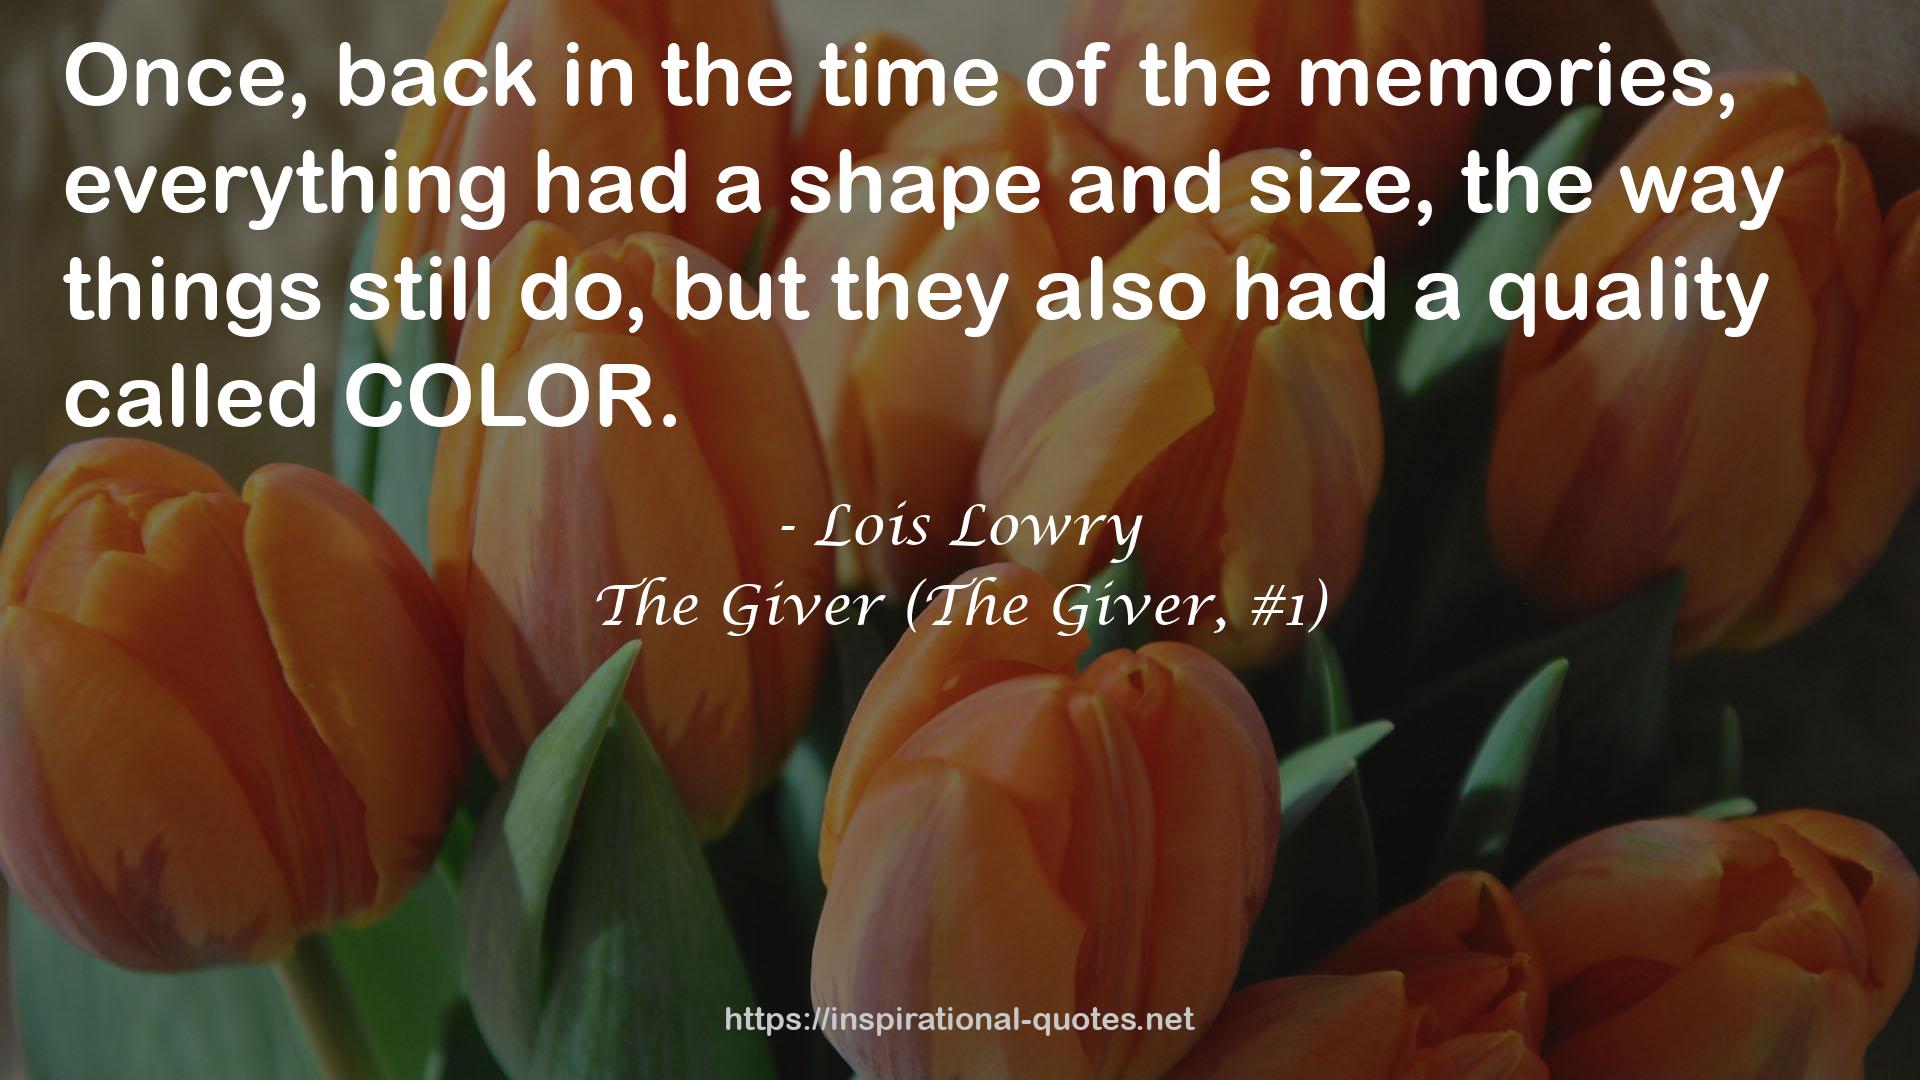 Lois Lowry QUOTES